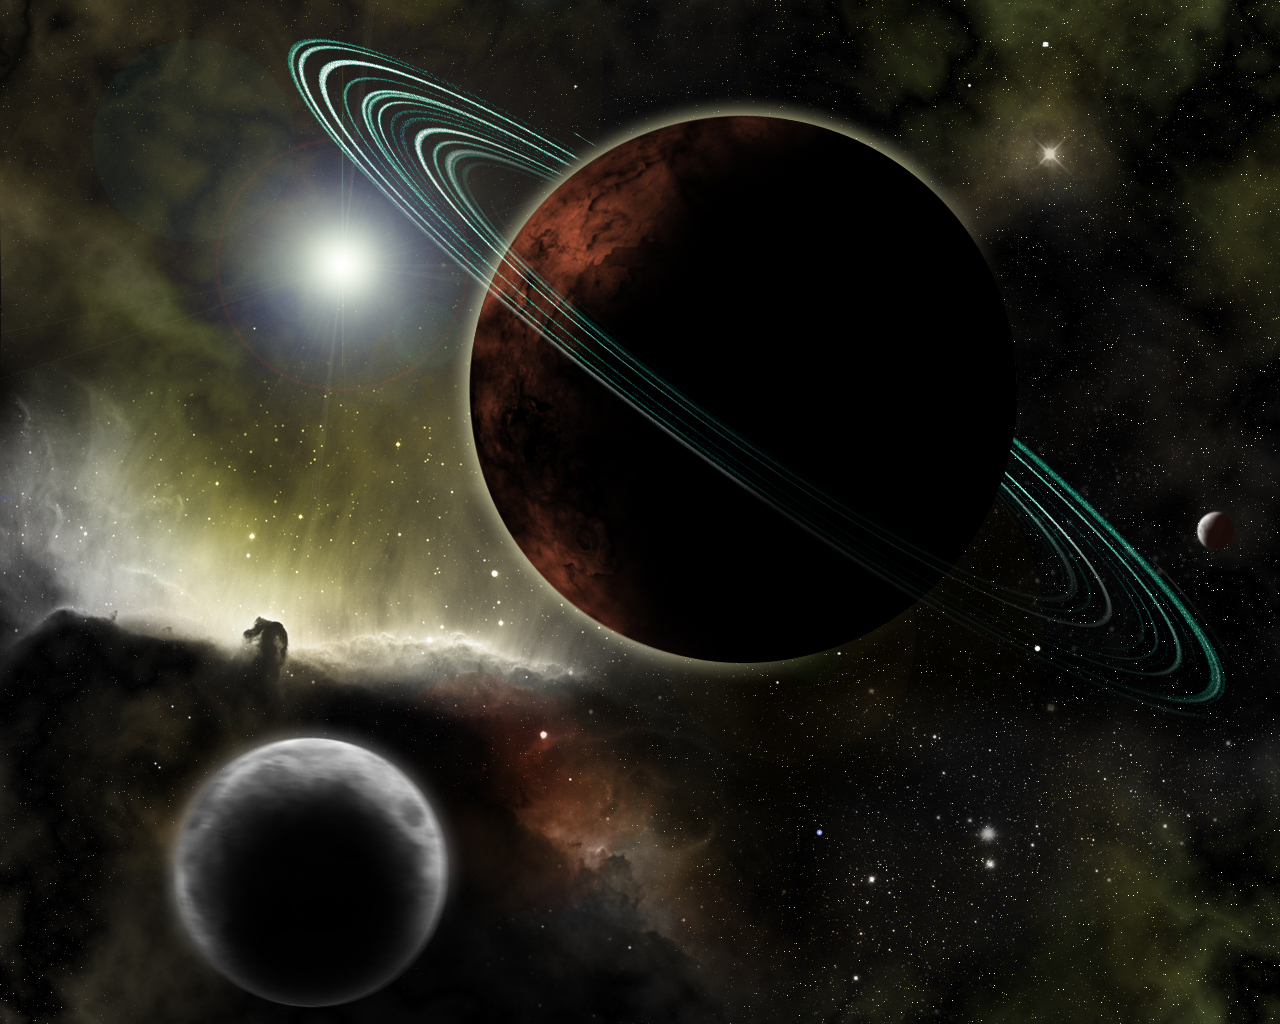 Distant Planets - Rings by kyle915 on DeviantArt